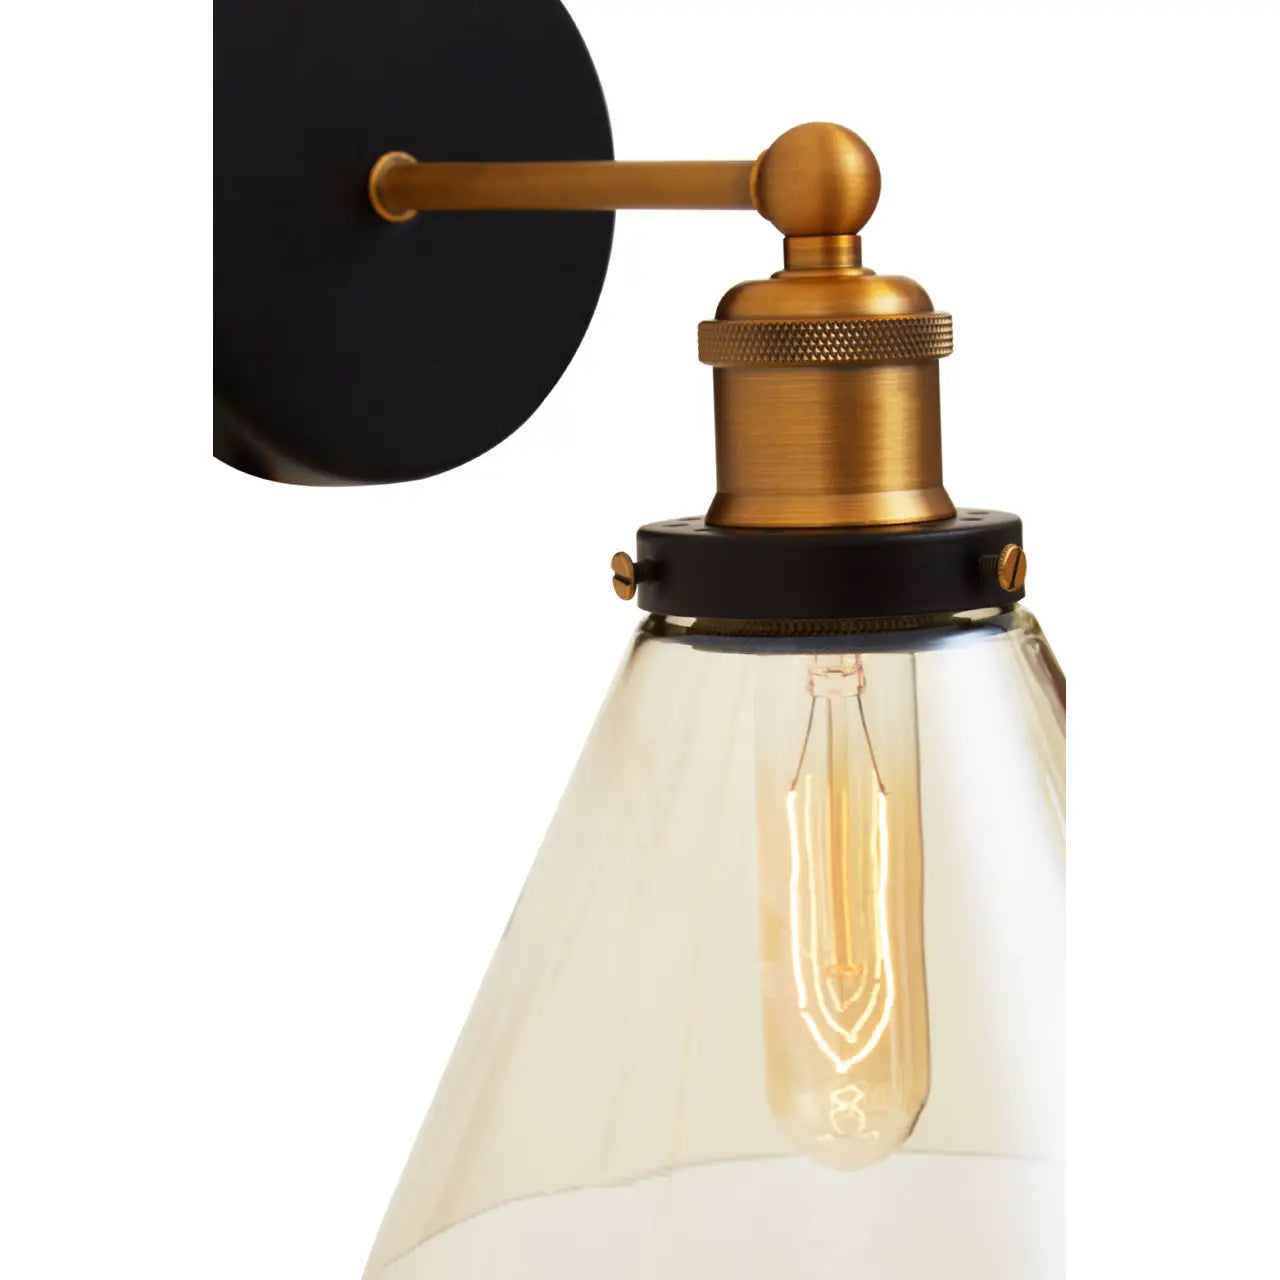 Black and gold wall light  Black and gold Sconce  cone wall sconce  cone wall light  brass wall sconce  brass wall light  gold wall sconce  gold wall light  bedside wall sconce  bedside wall light  wall lighting  modern wall light  modern wall sconce  Wall sconce  Wall light